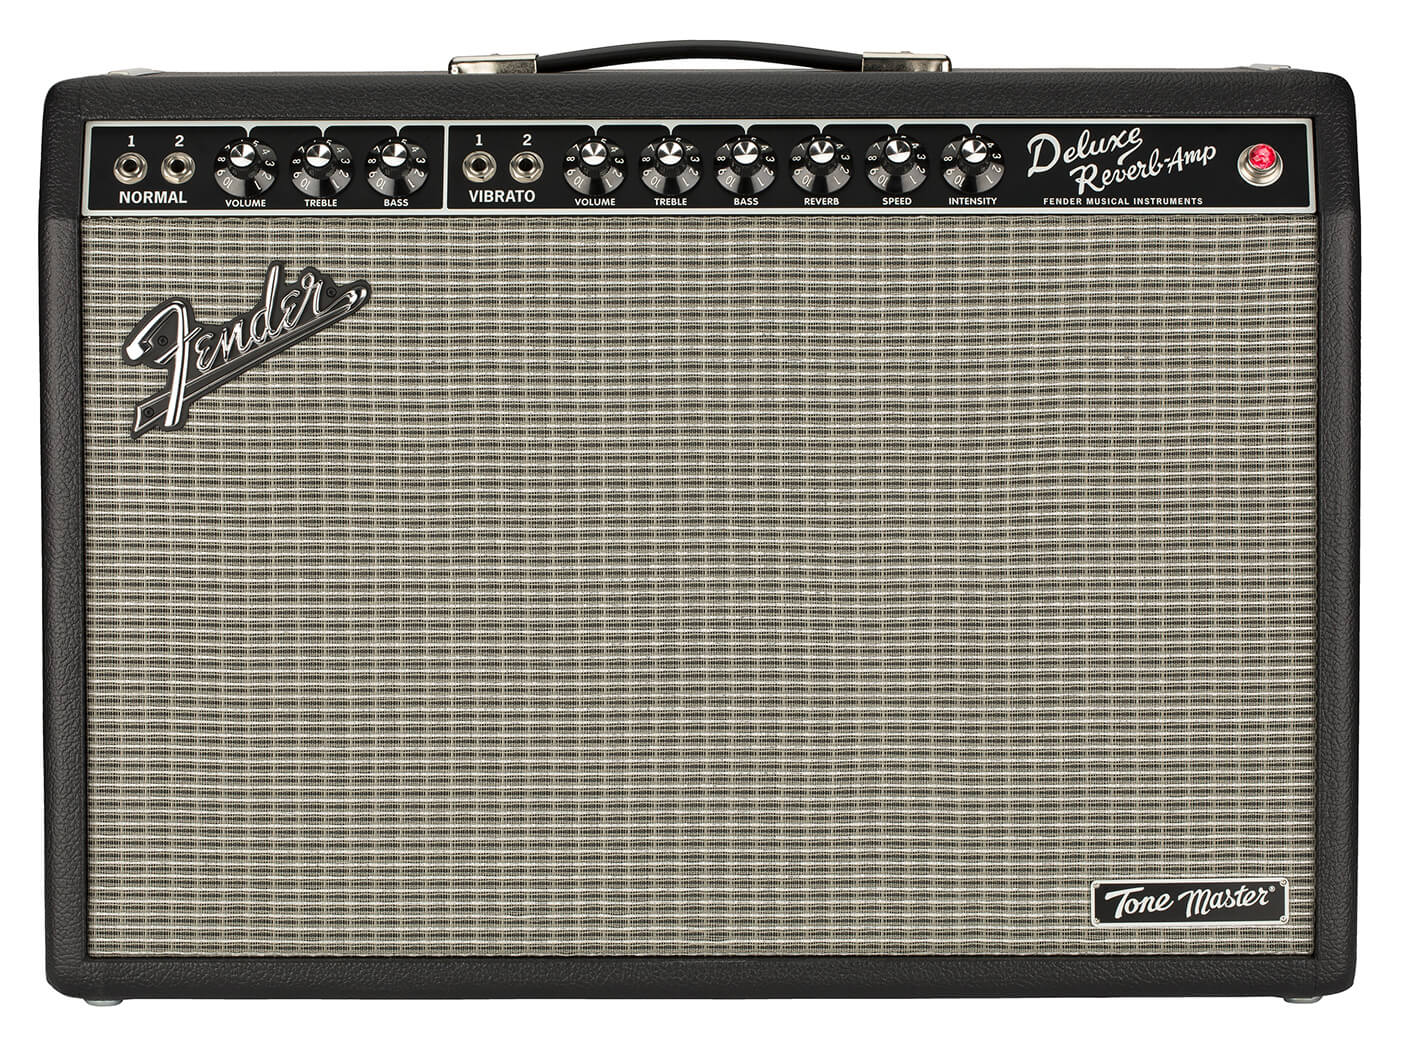 Fender Tone Master Deluxe Reverb front